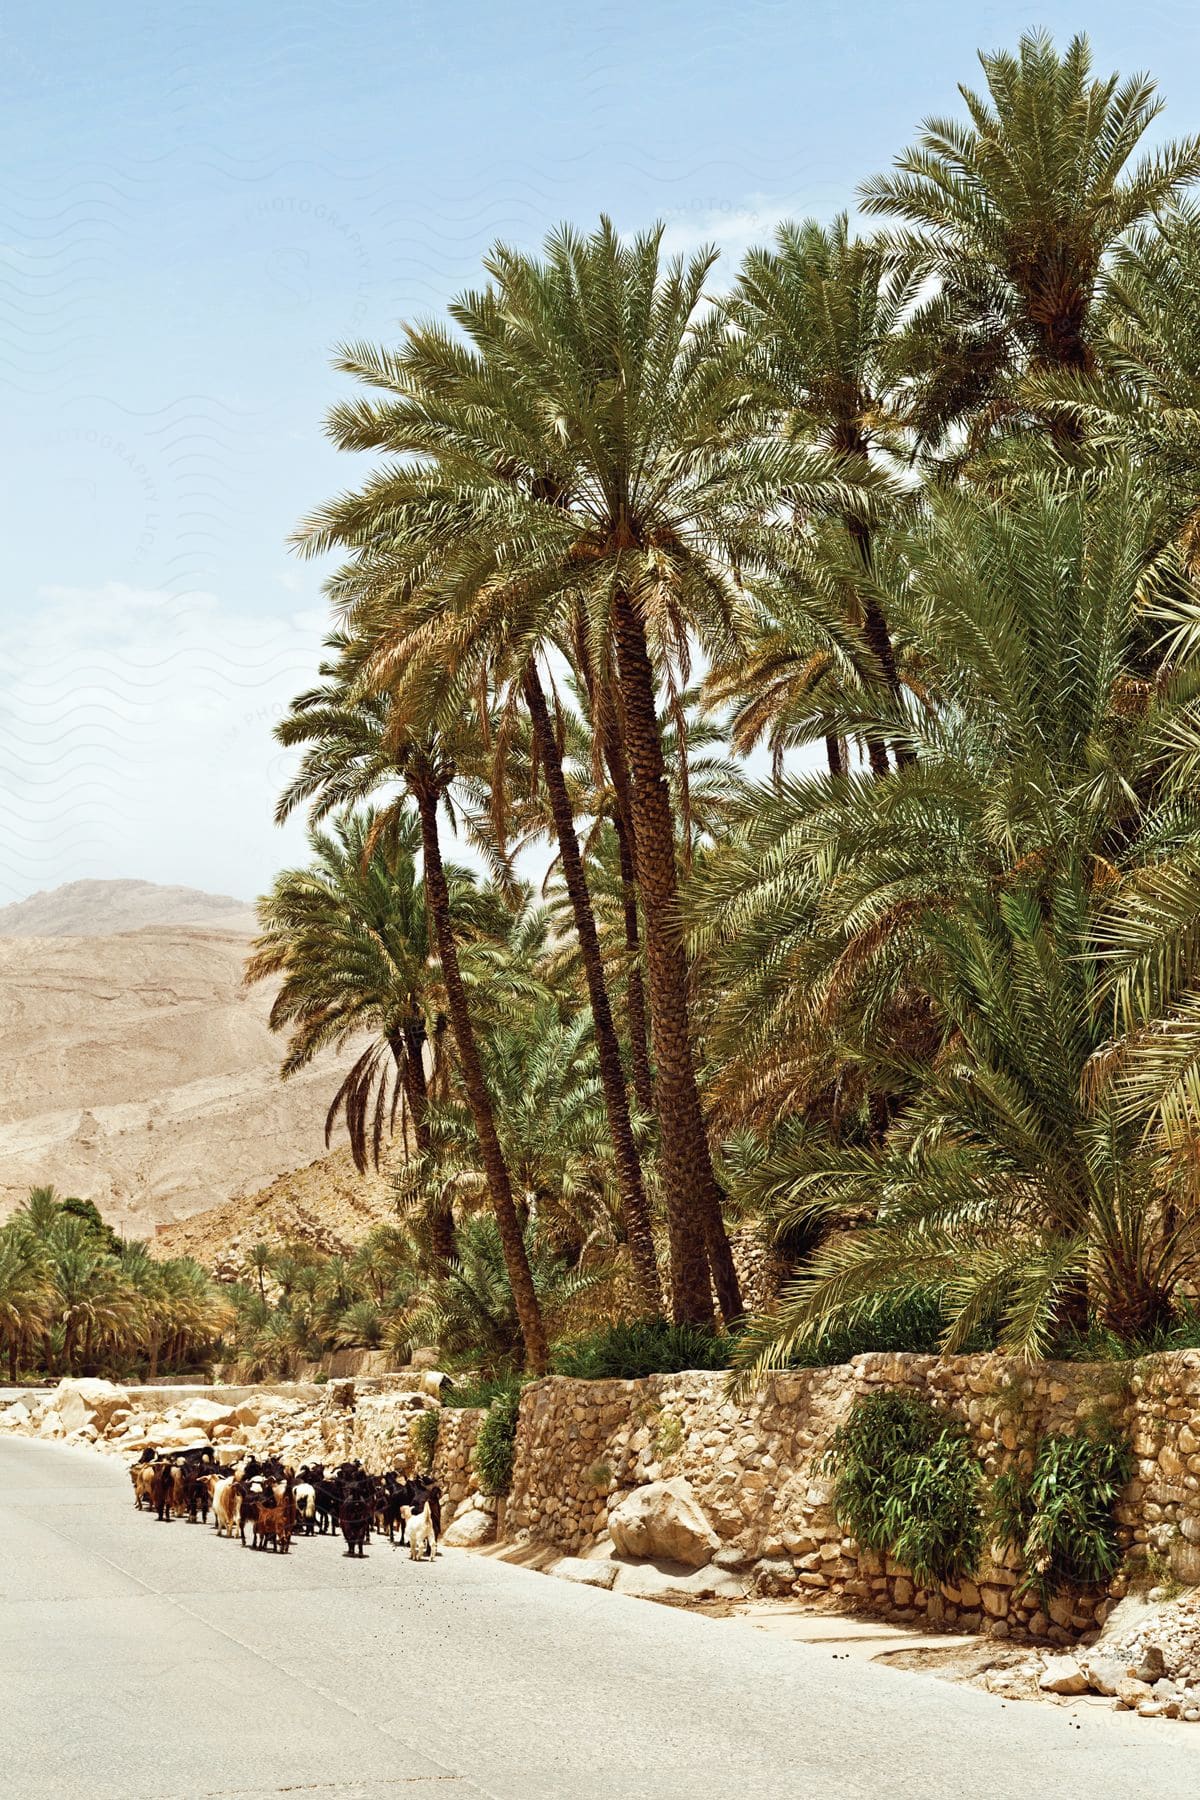 A herd of goats walks towards a desert oasis following a road bordered by palm trees and a stone wall